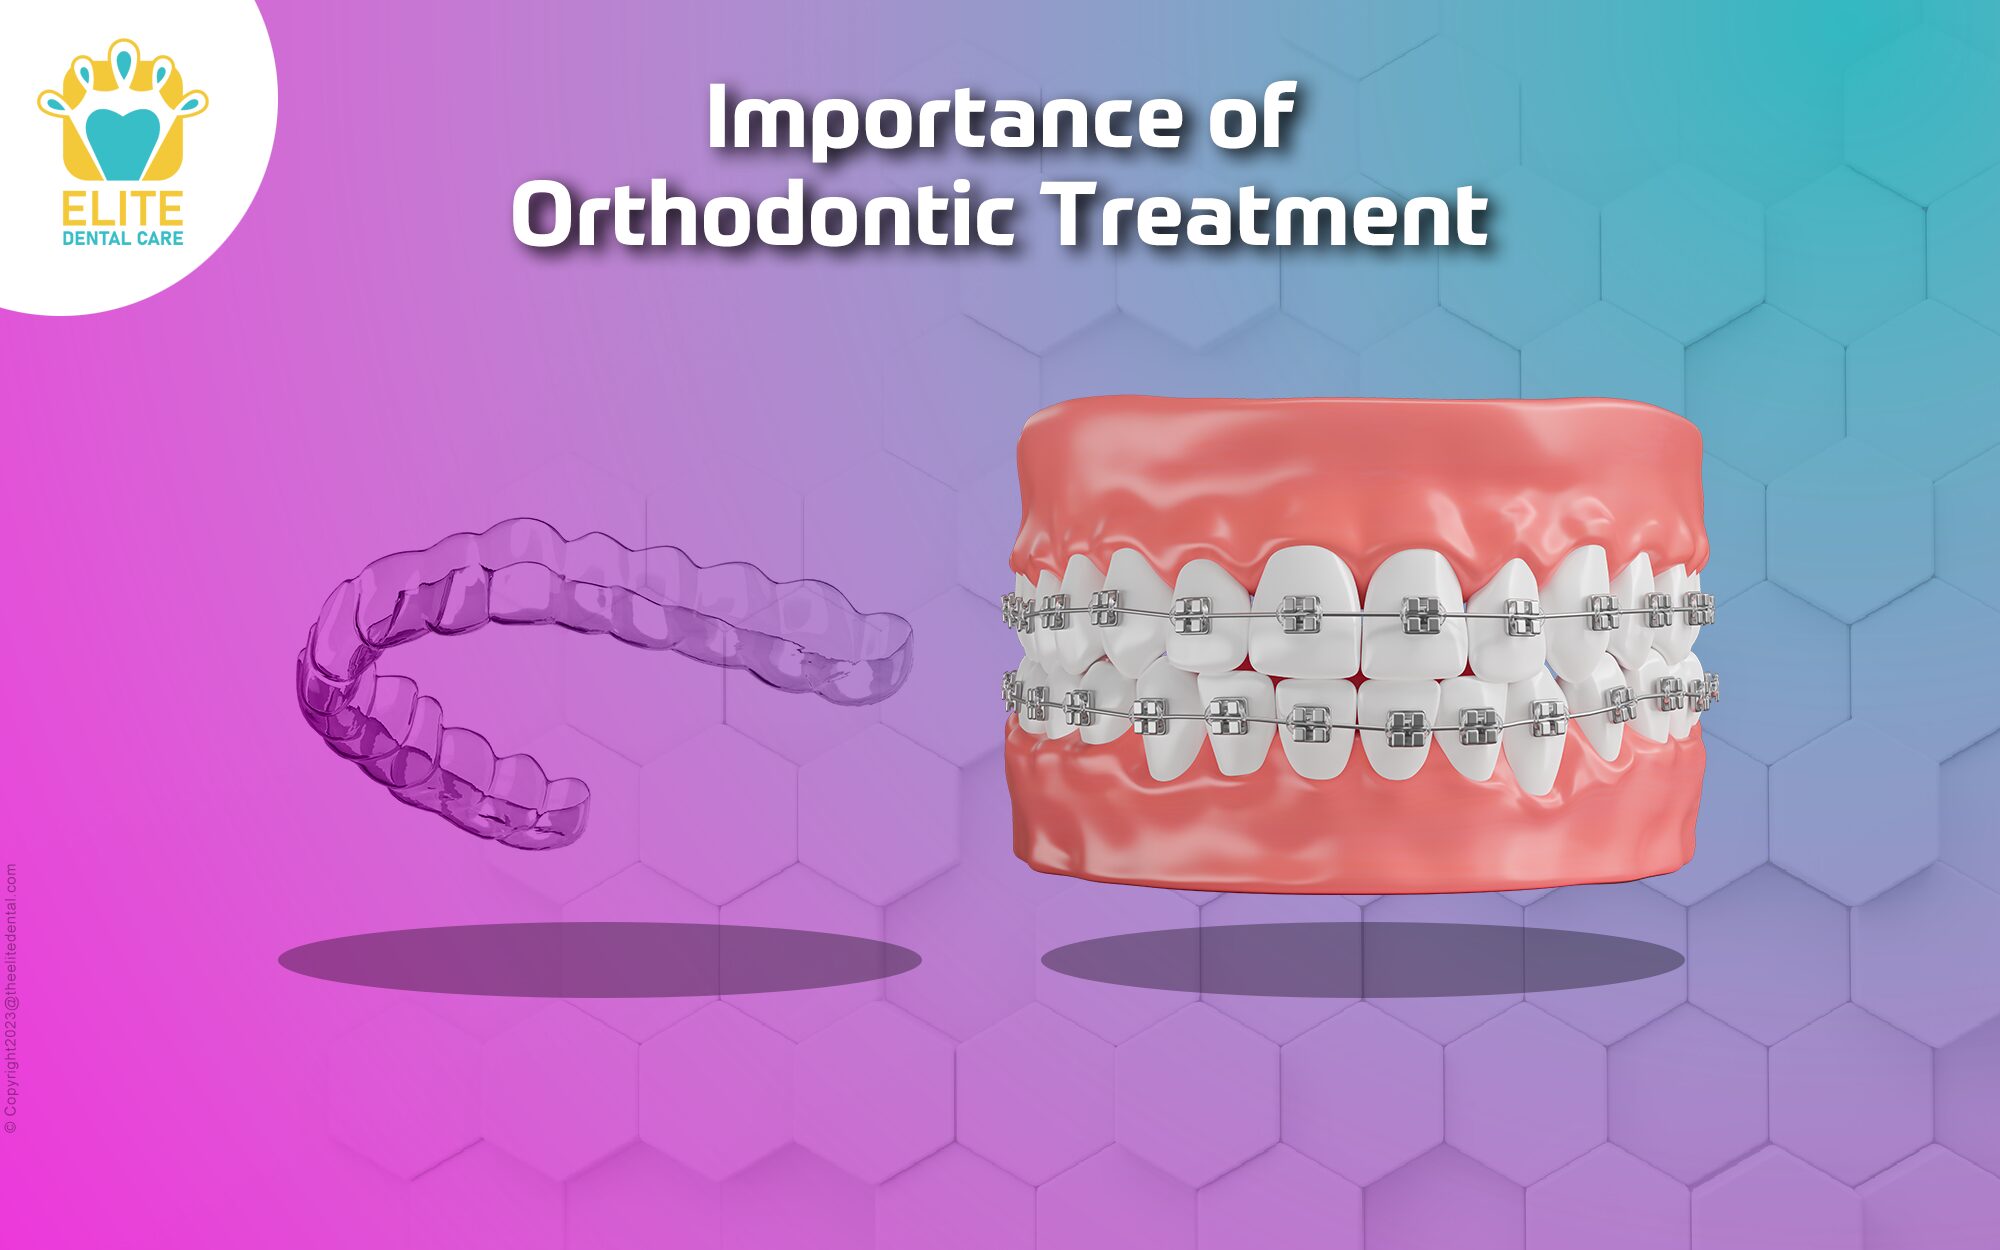 IMPORTANCE OF ORTHODONTIC TREATMENT